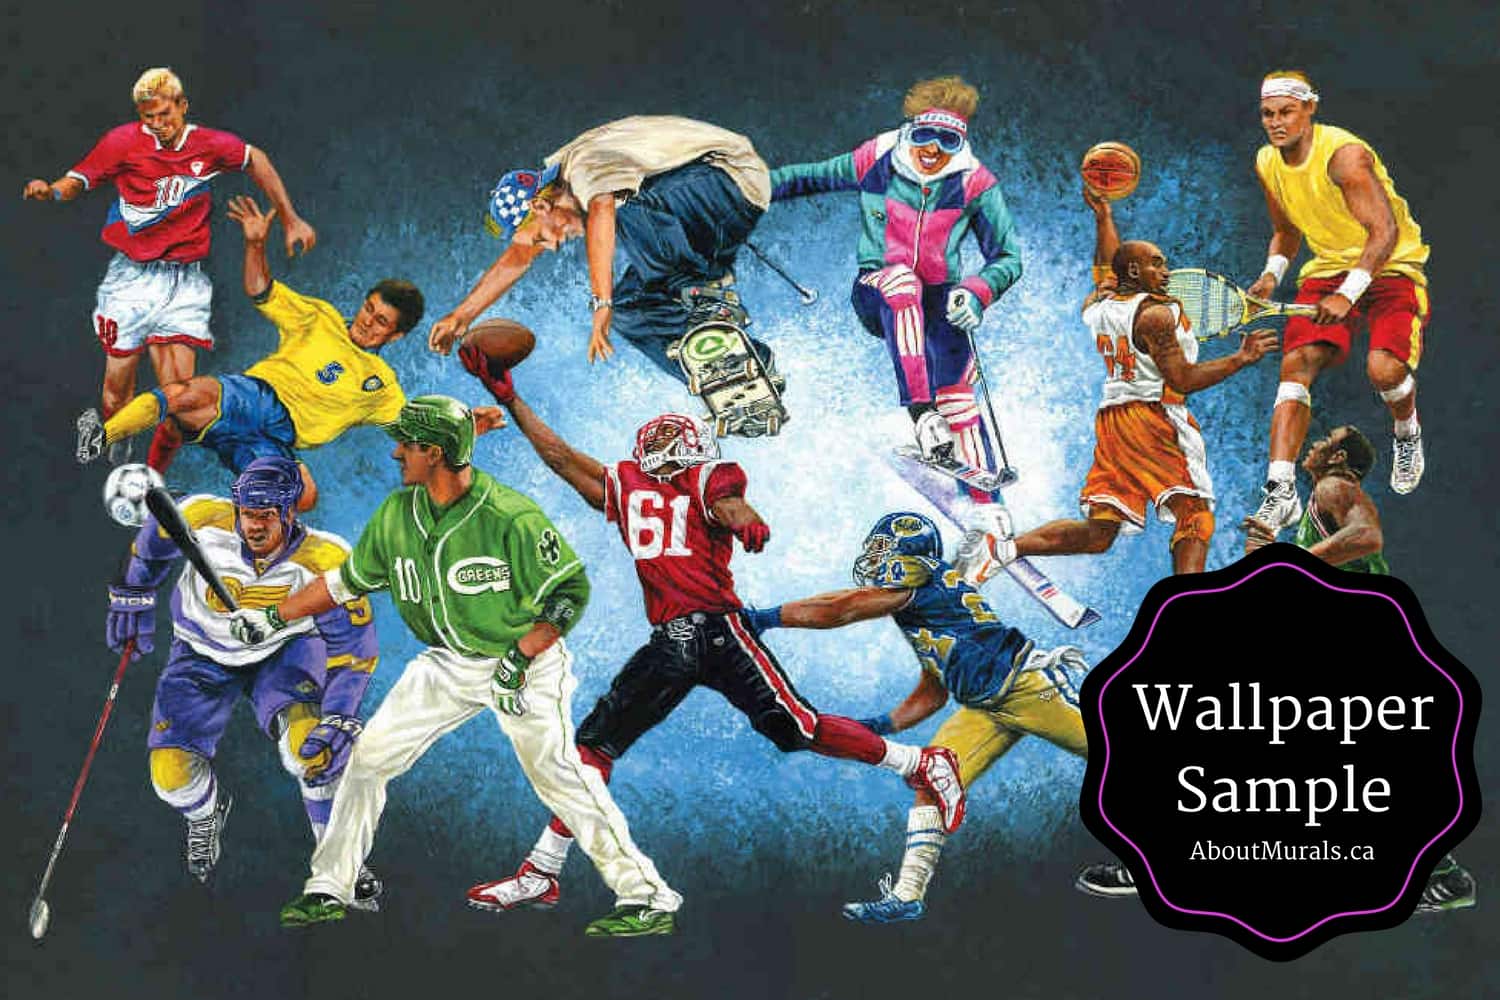 Sports Unlimited Wallpaper Sample For Kids Walls About Murals